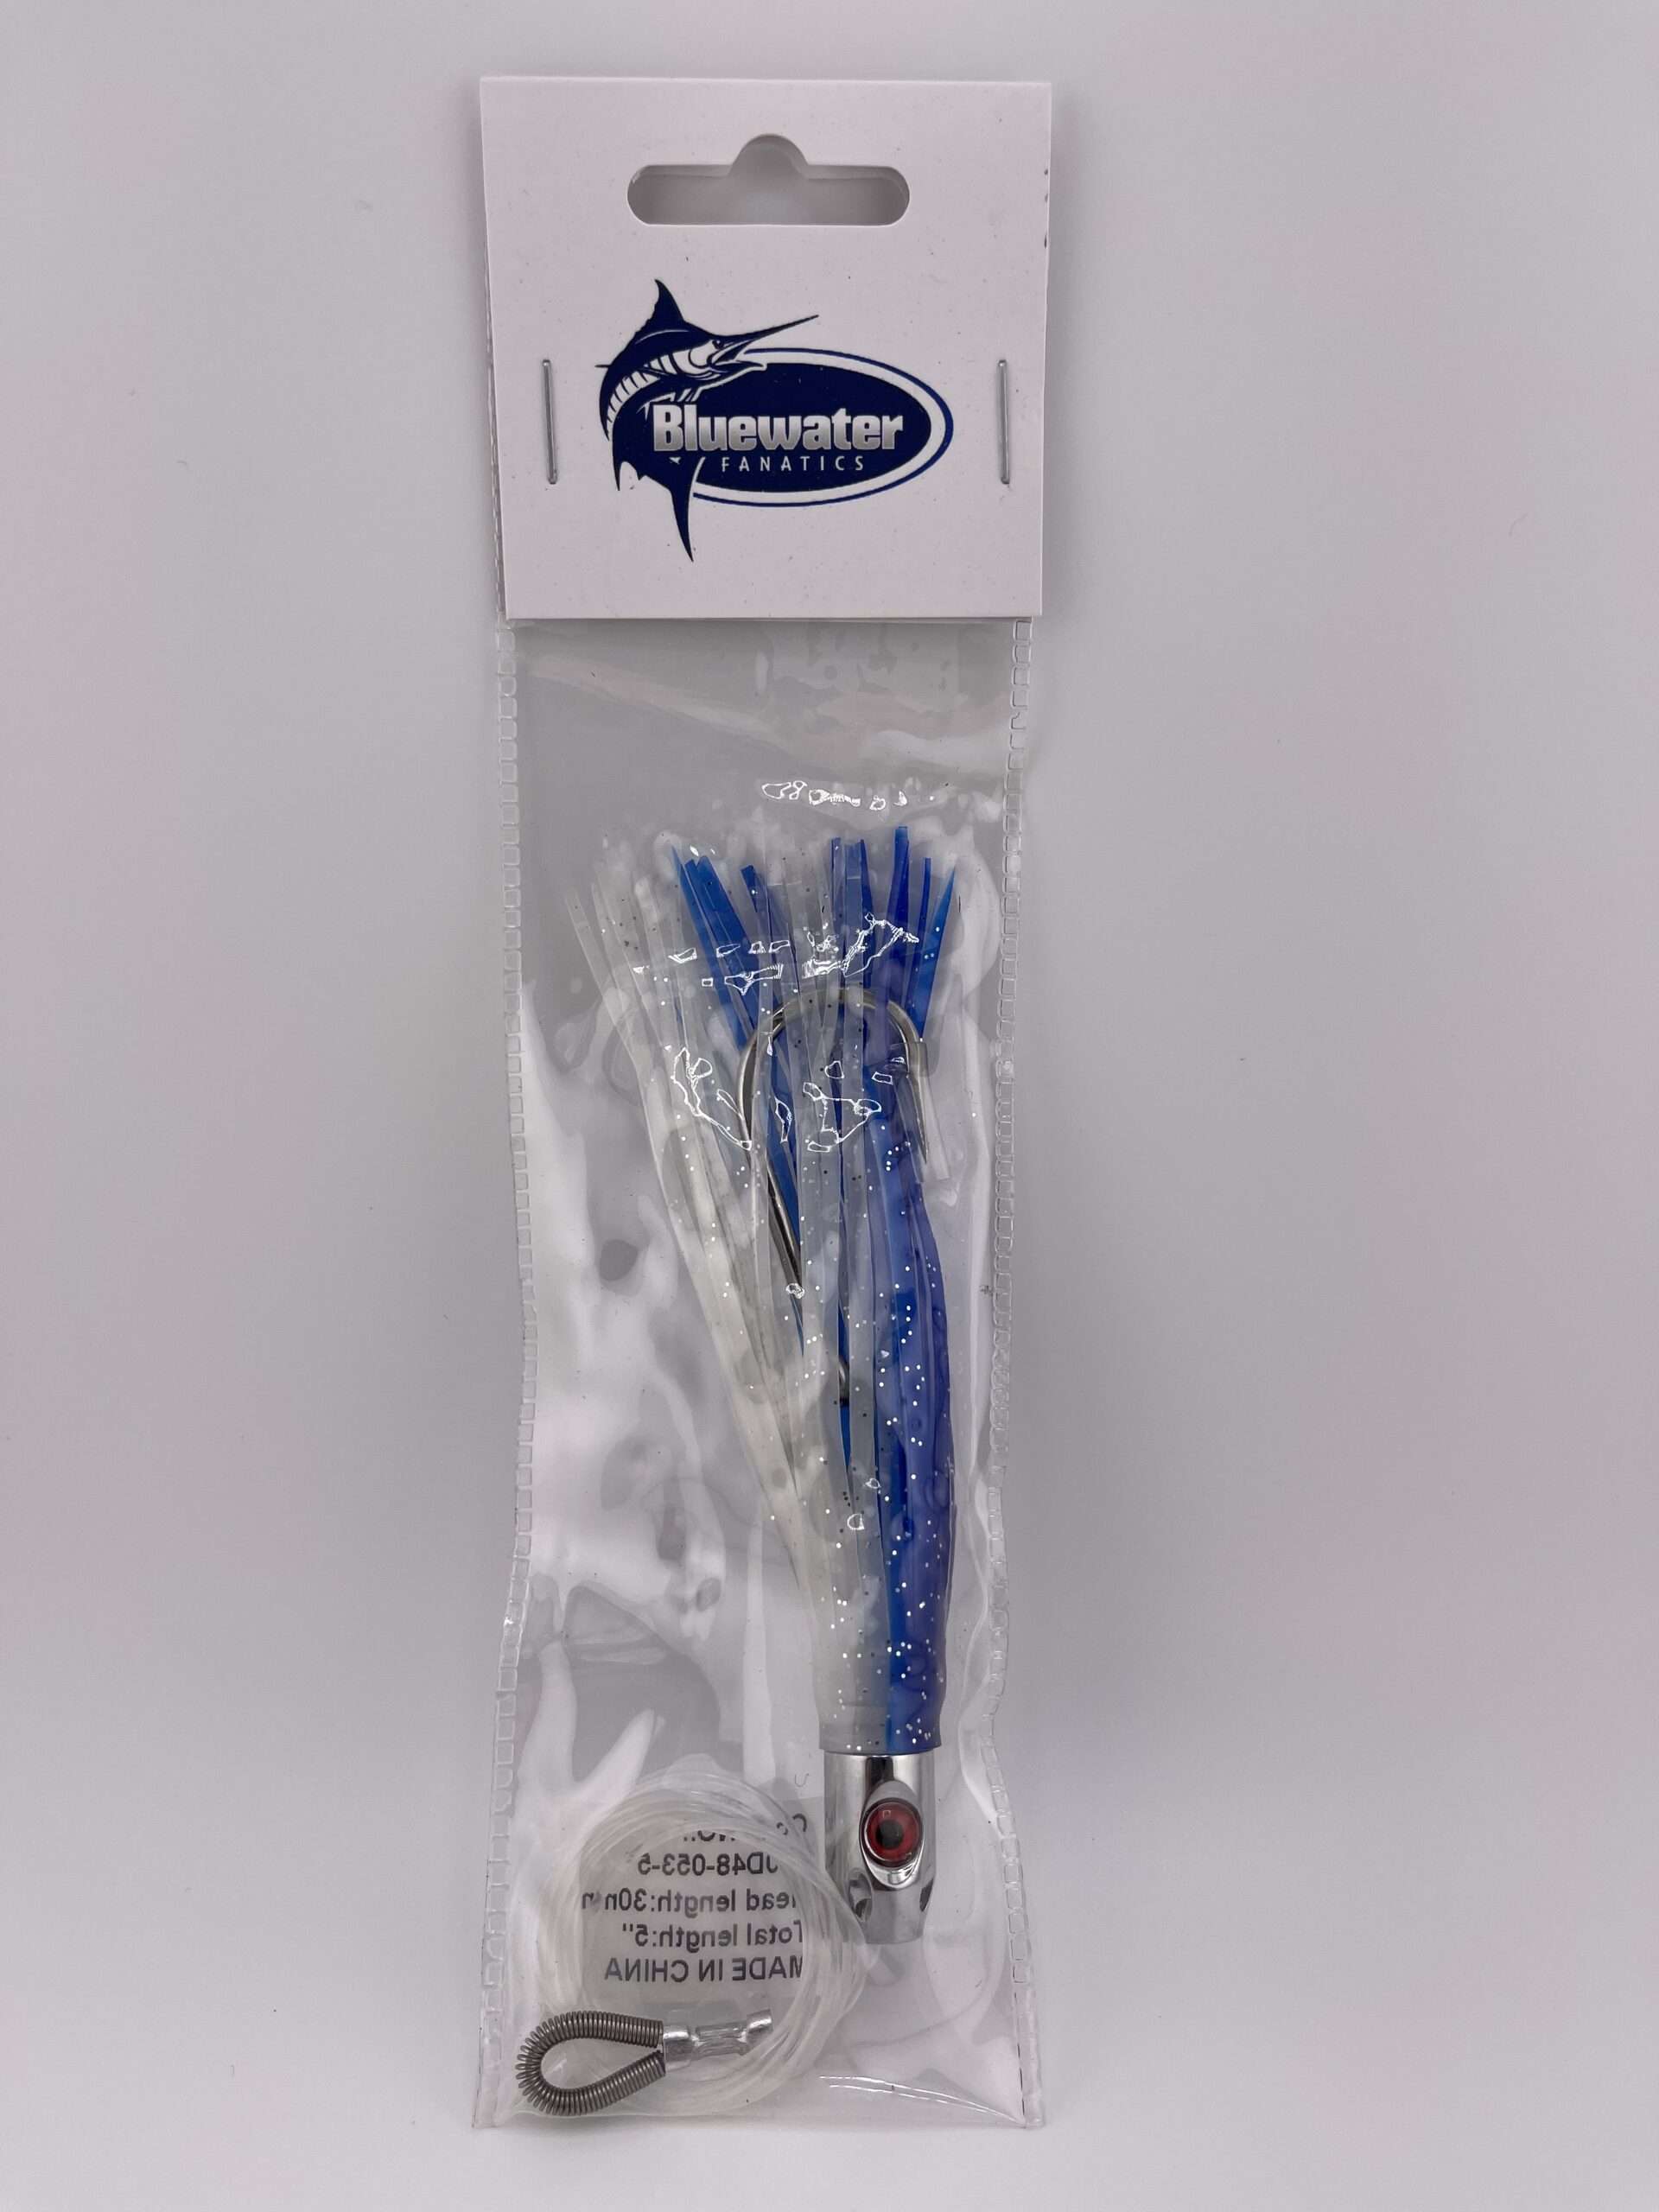 5 Blue and White Small Jet Head Saltwater Fishing Lure. Good for